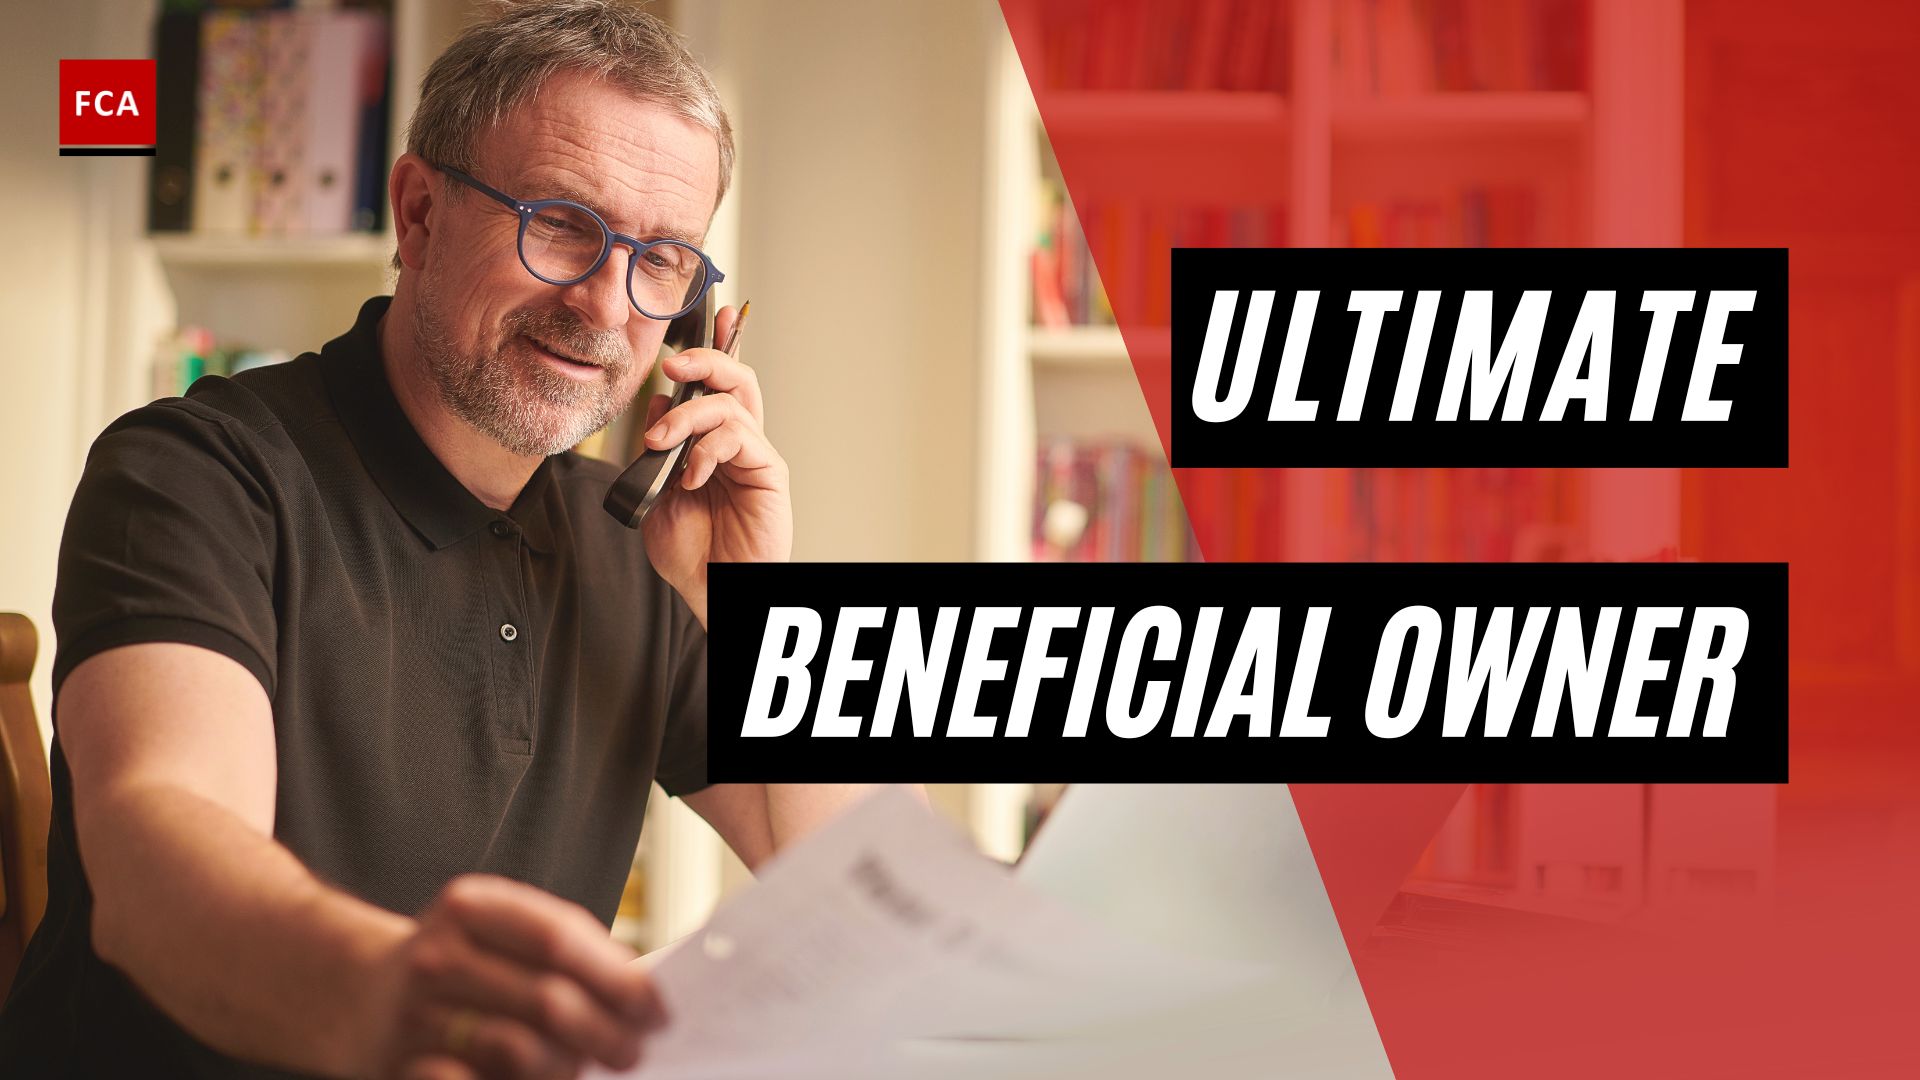 Ultimate Beneficial Owner